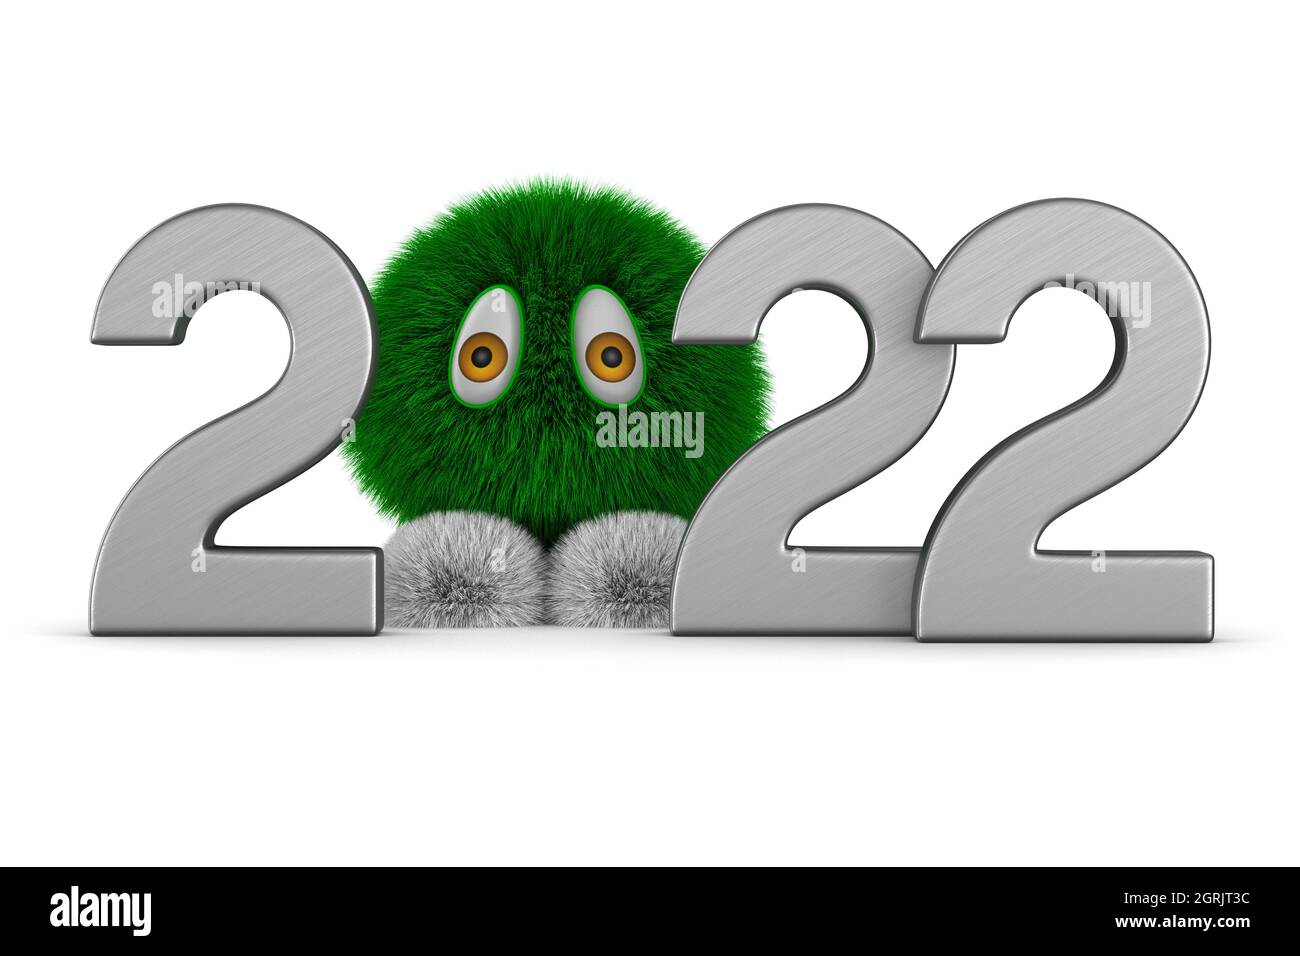 2022 new year. Isolated 3D illustration Stock Photo